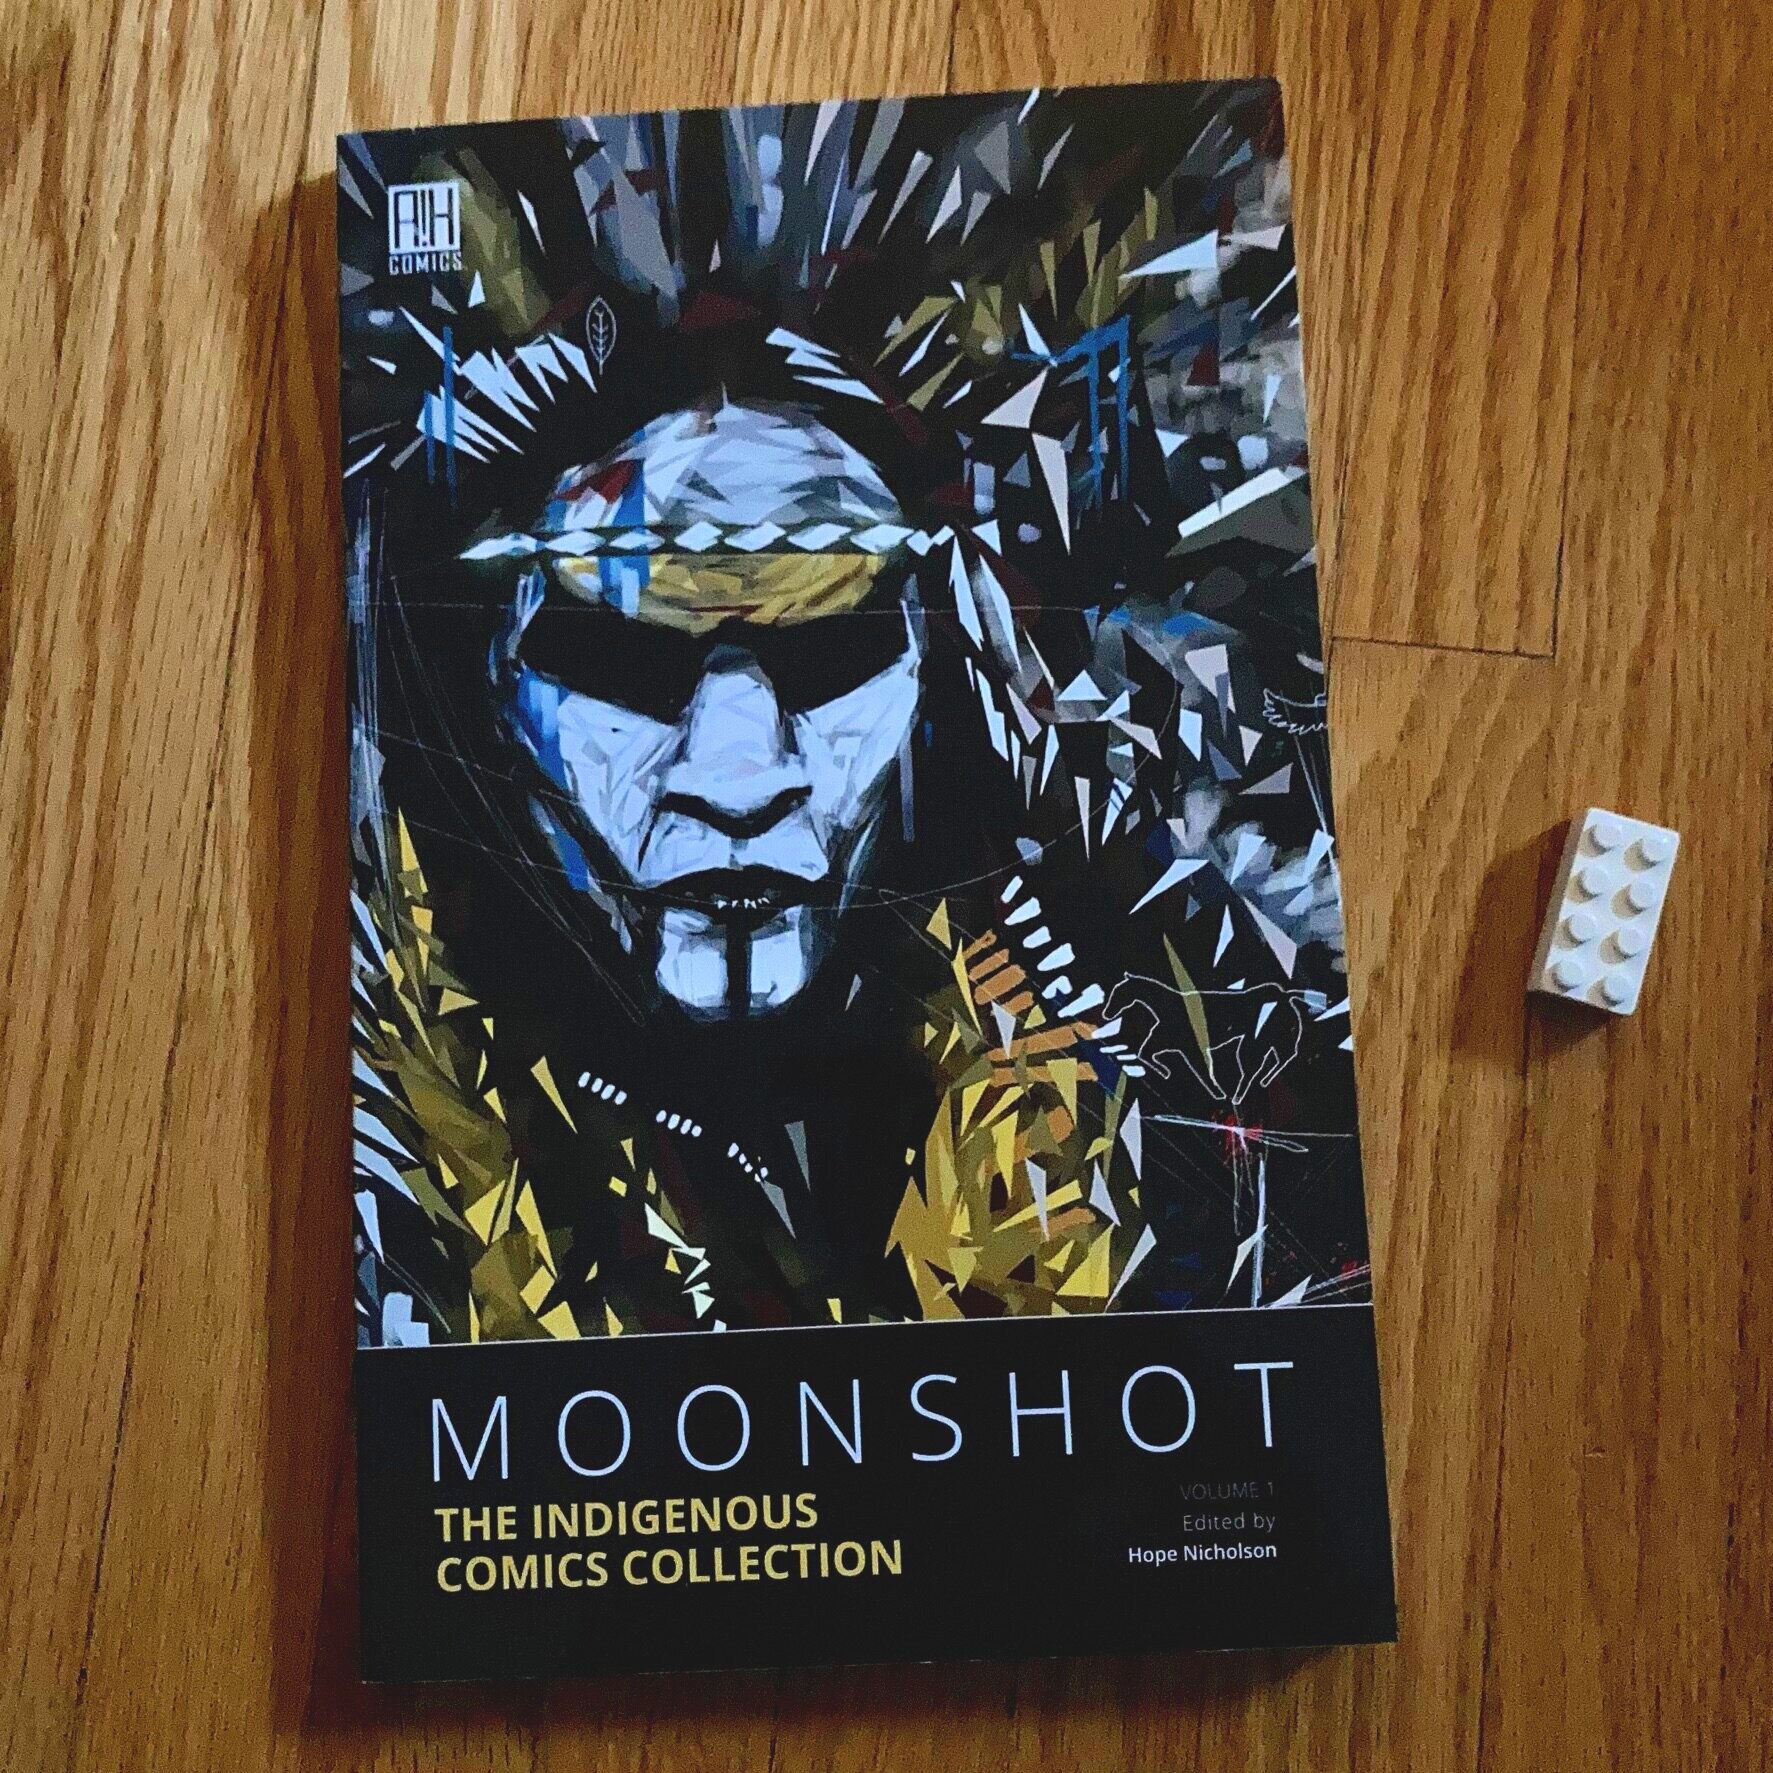 The cover of Moonshot, Volume 1